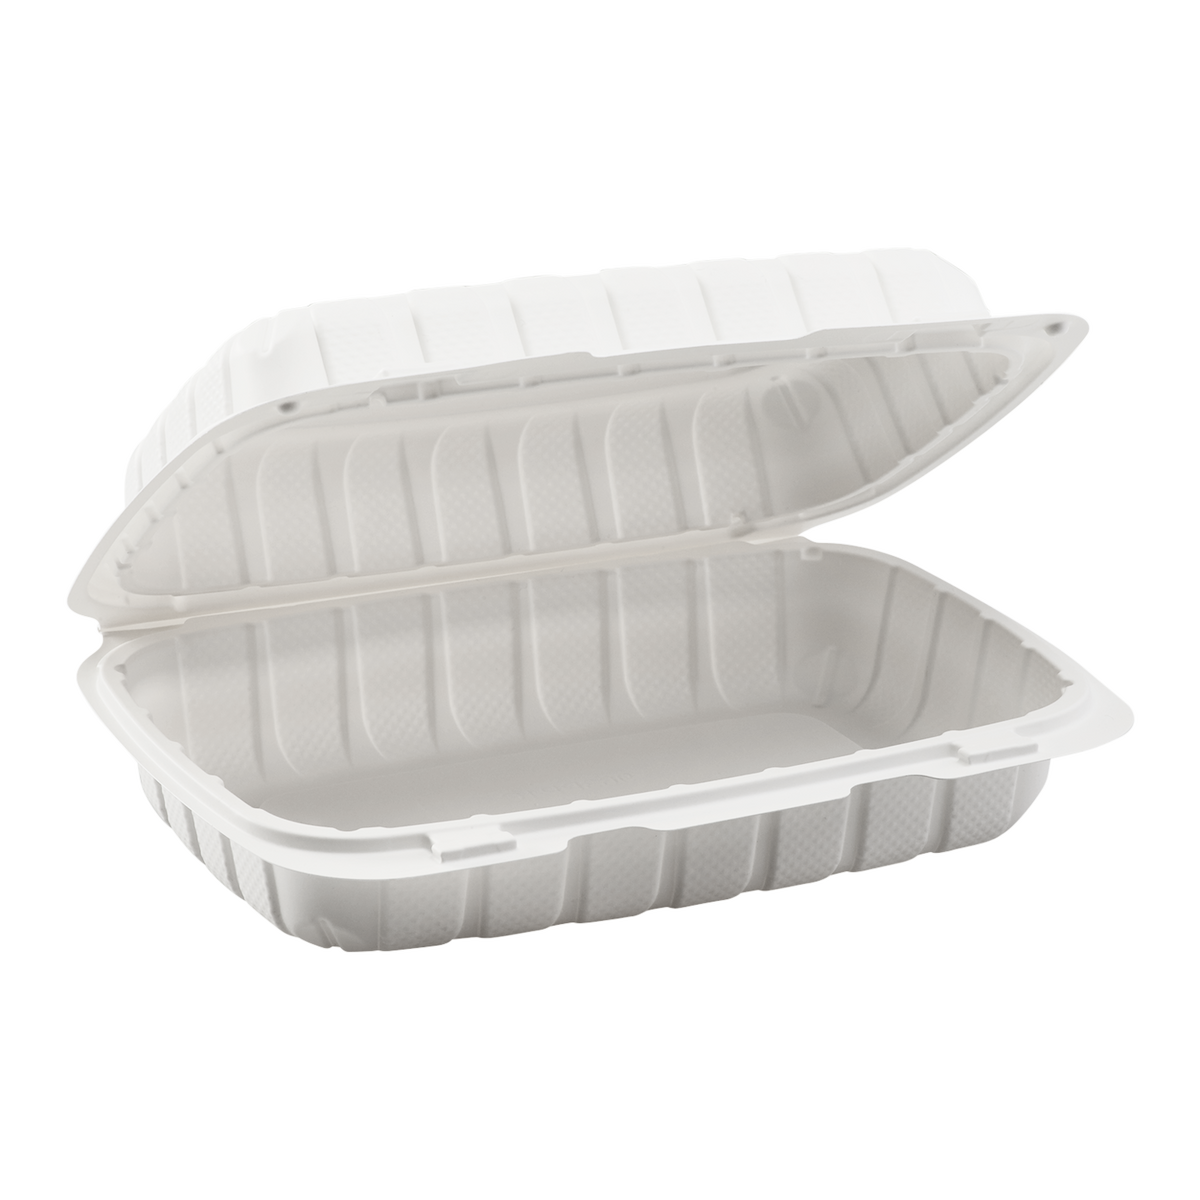 10oz White Compostable Paper Takeout Containers